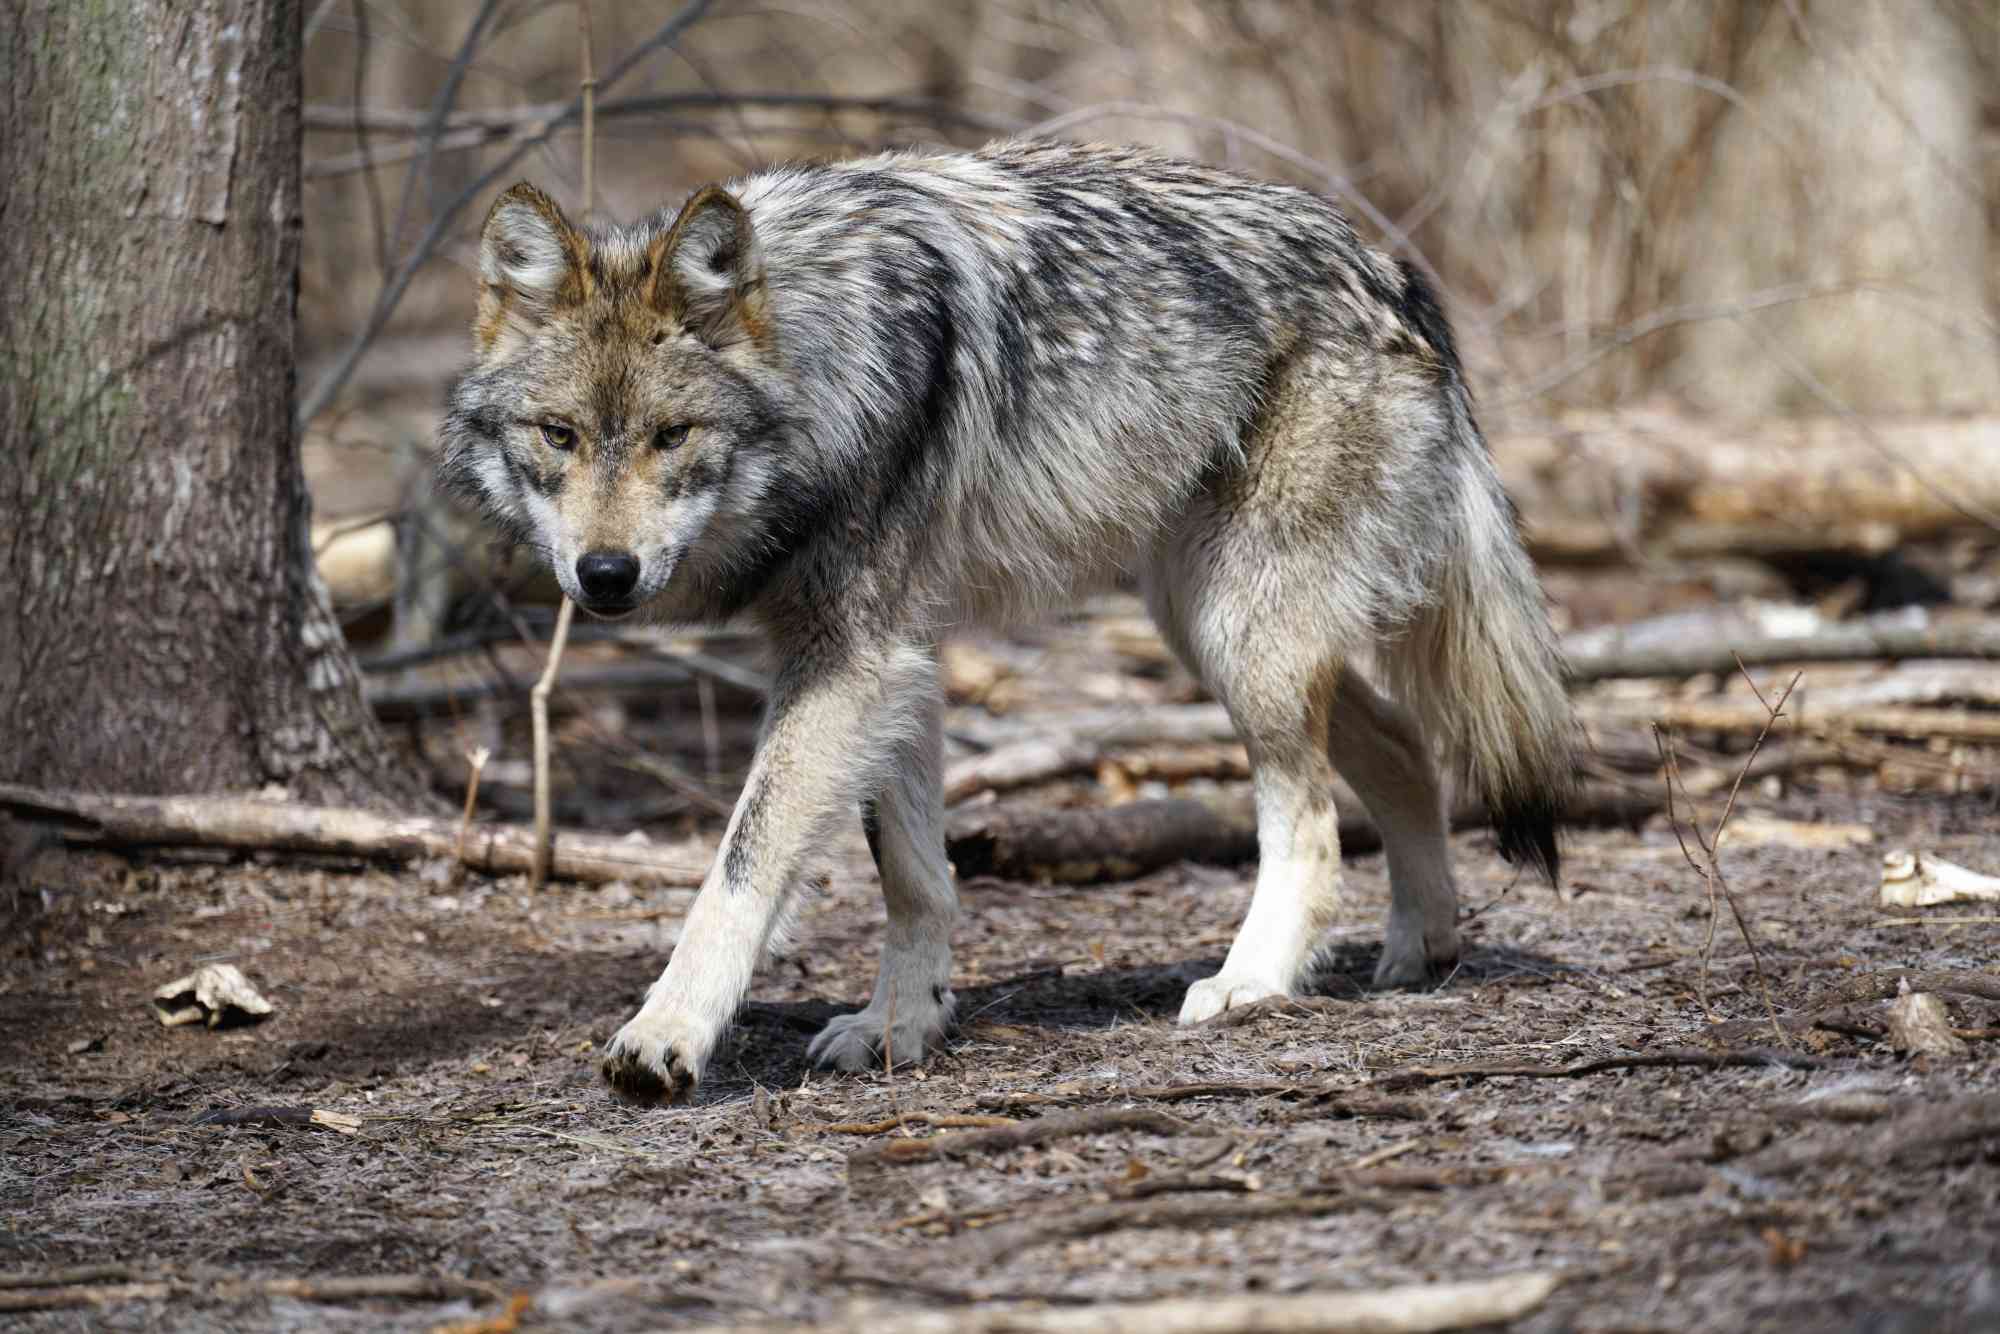 A Mexican gray wolf stalks through a wooded area. The ground is muddy and the trees are brown and bare.